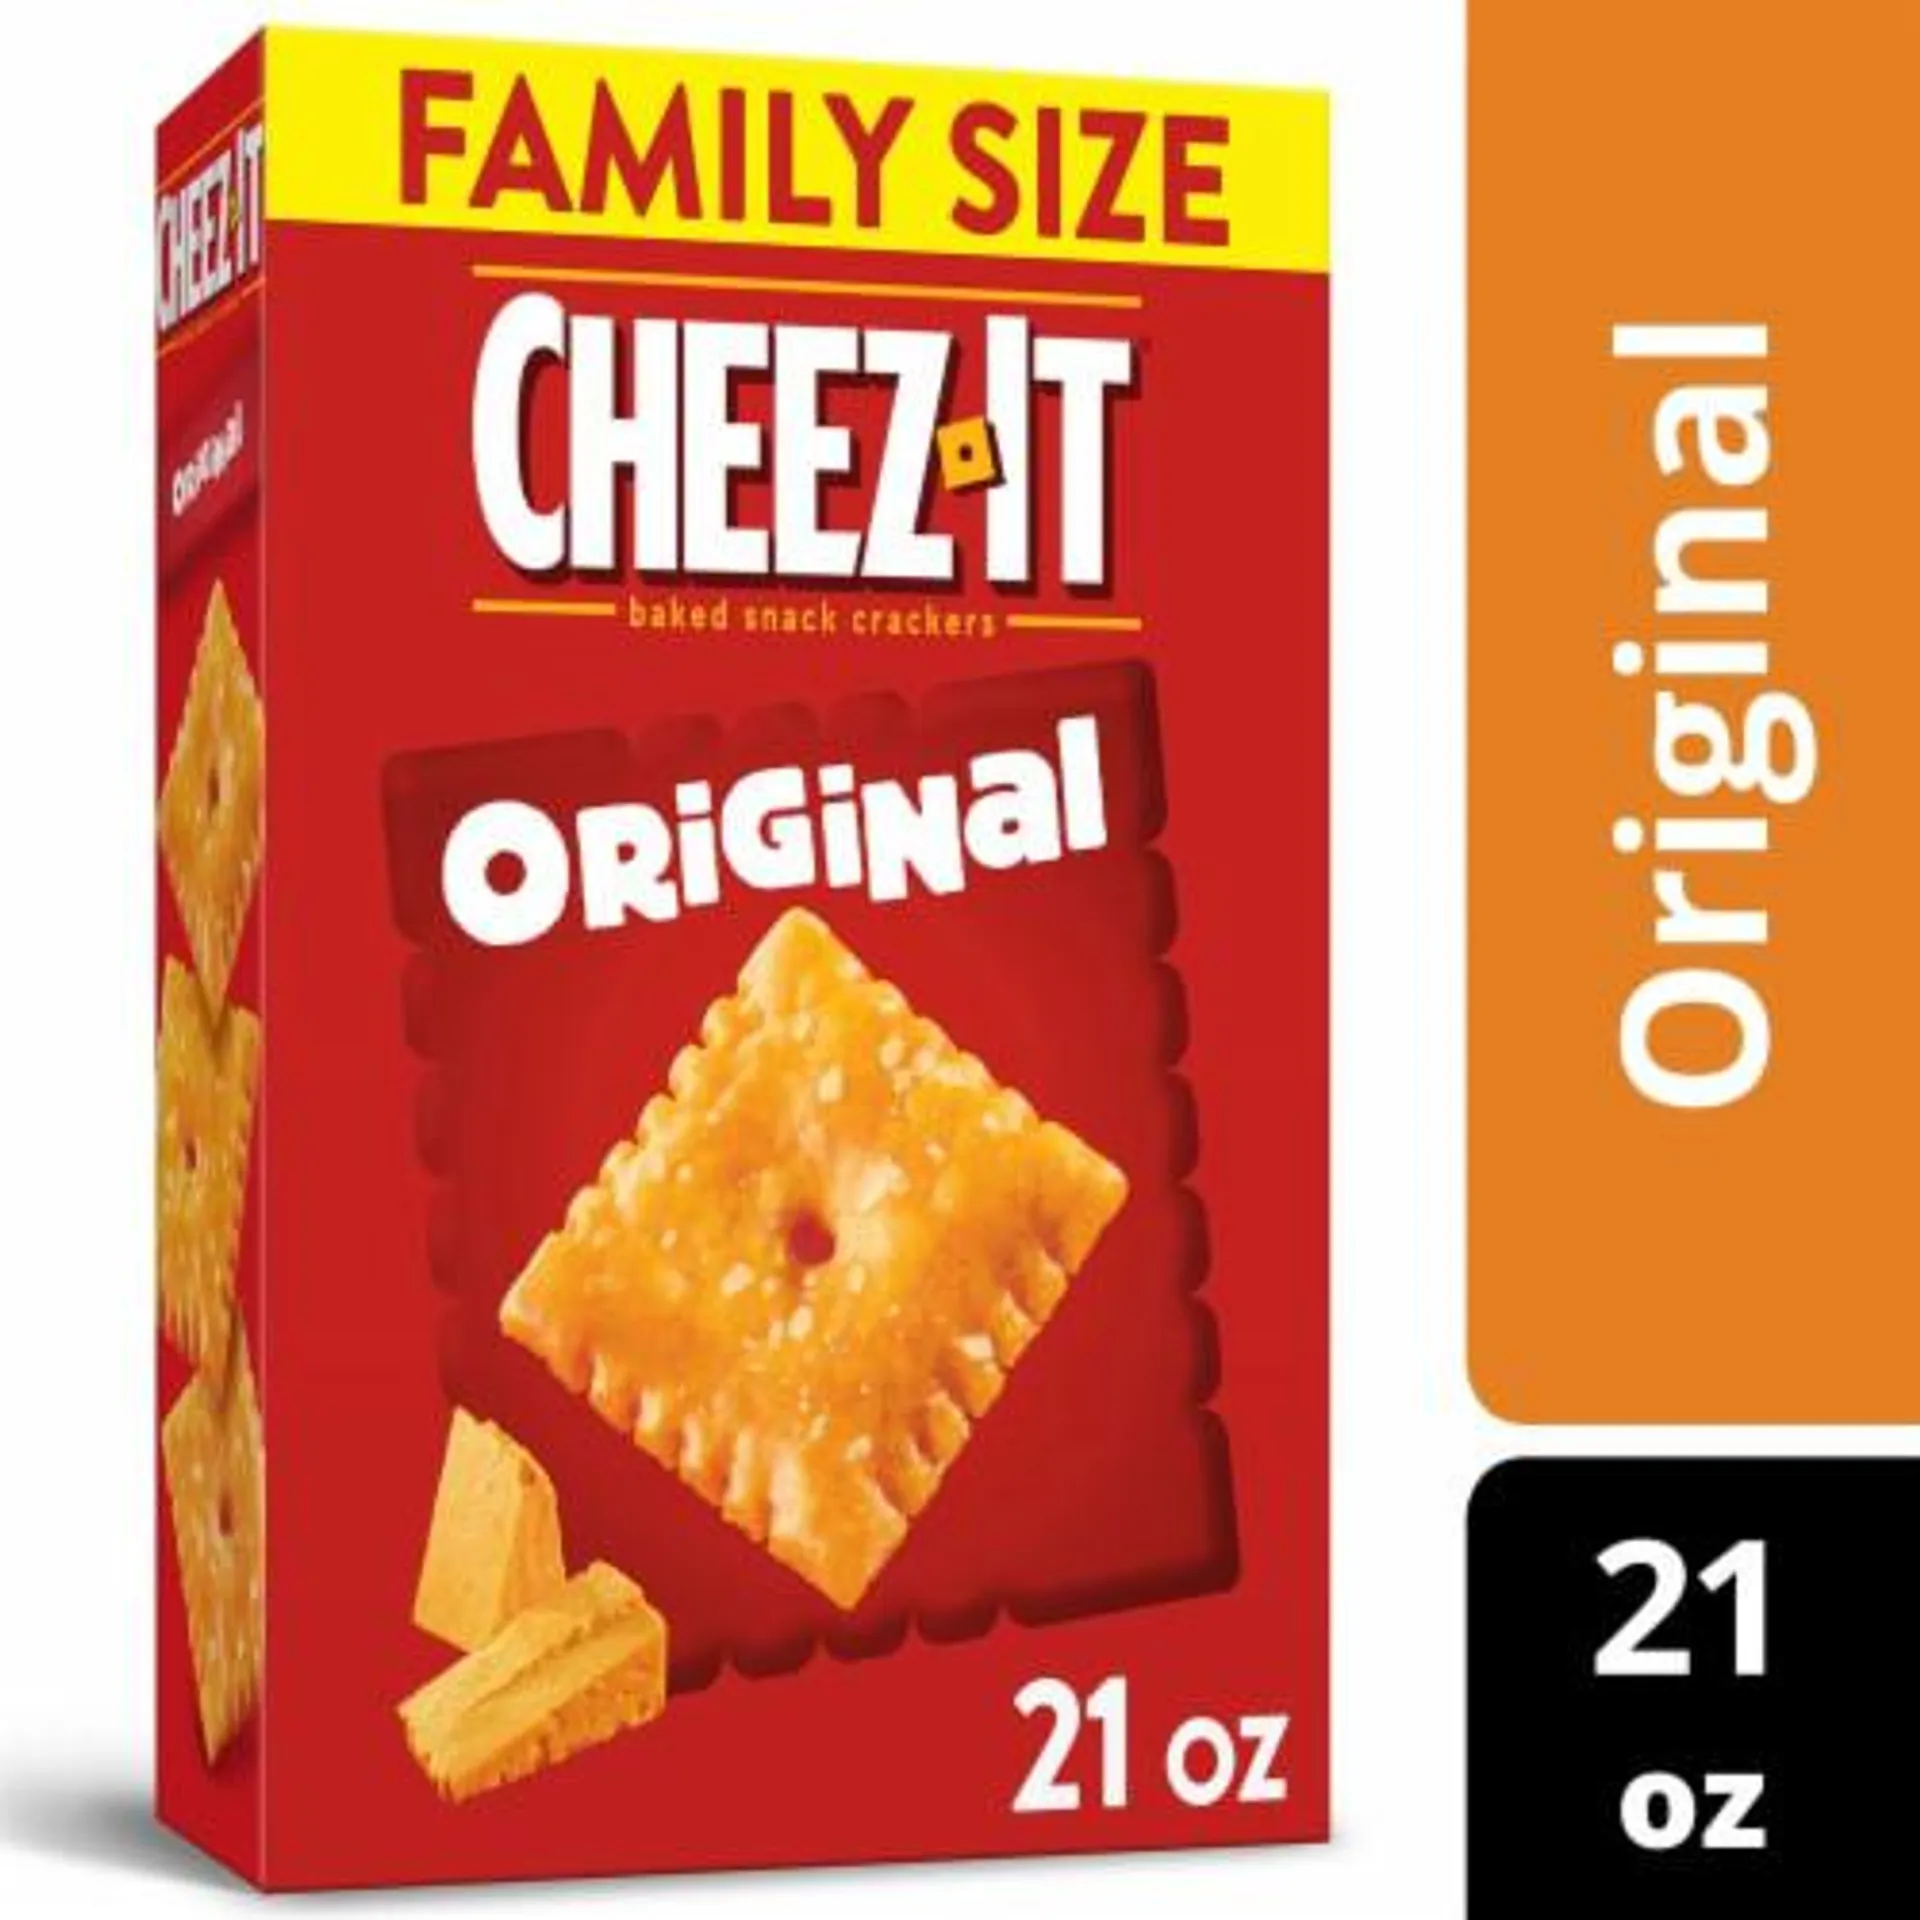 Cheez-It Original Cheese Crackers Family Size